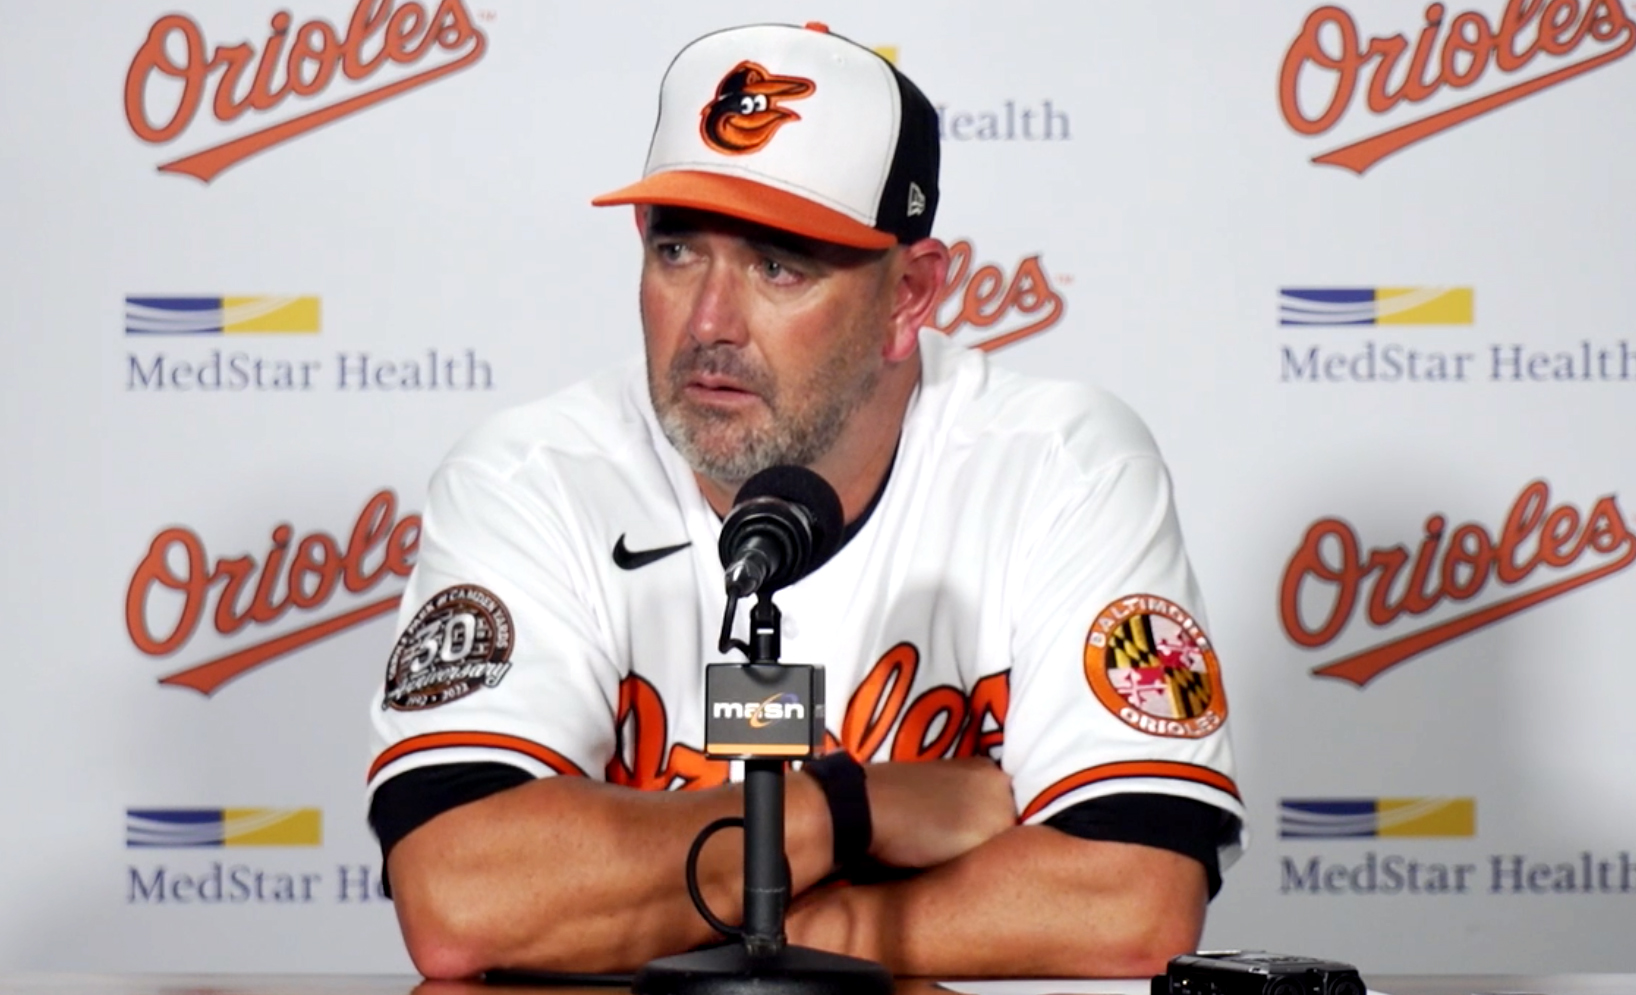 Who is the Orioles' most “indispensable” player? - Beyond the Box